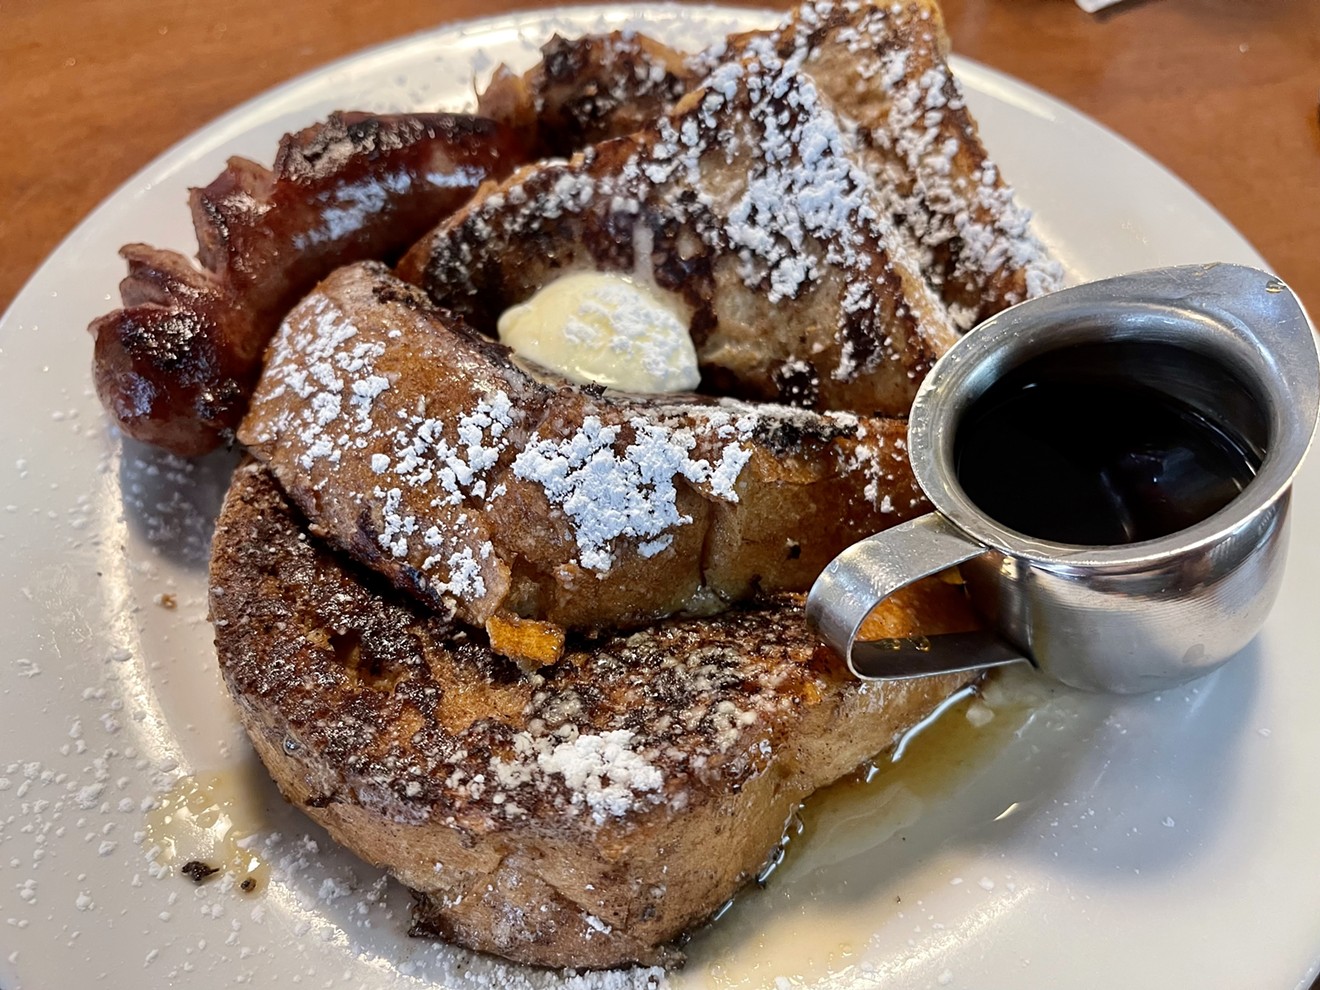 If the French toast special is available at Matt's Big Breakfast, order it.